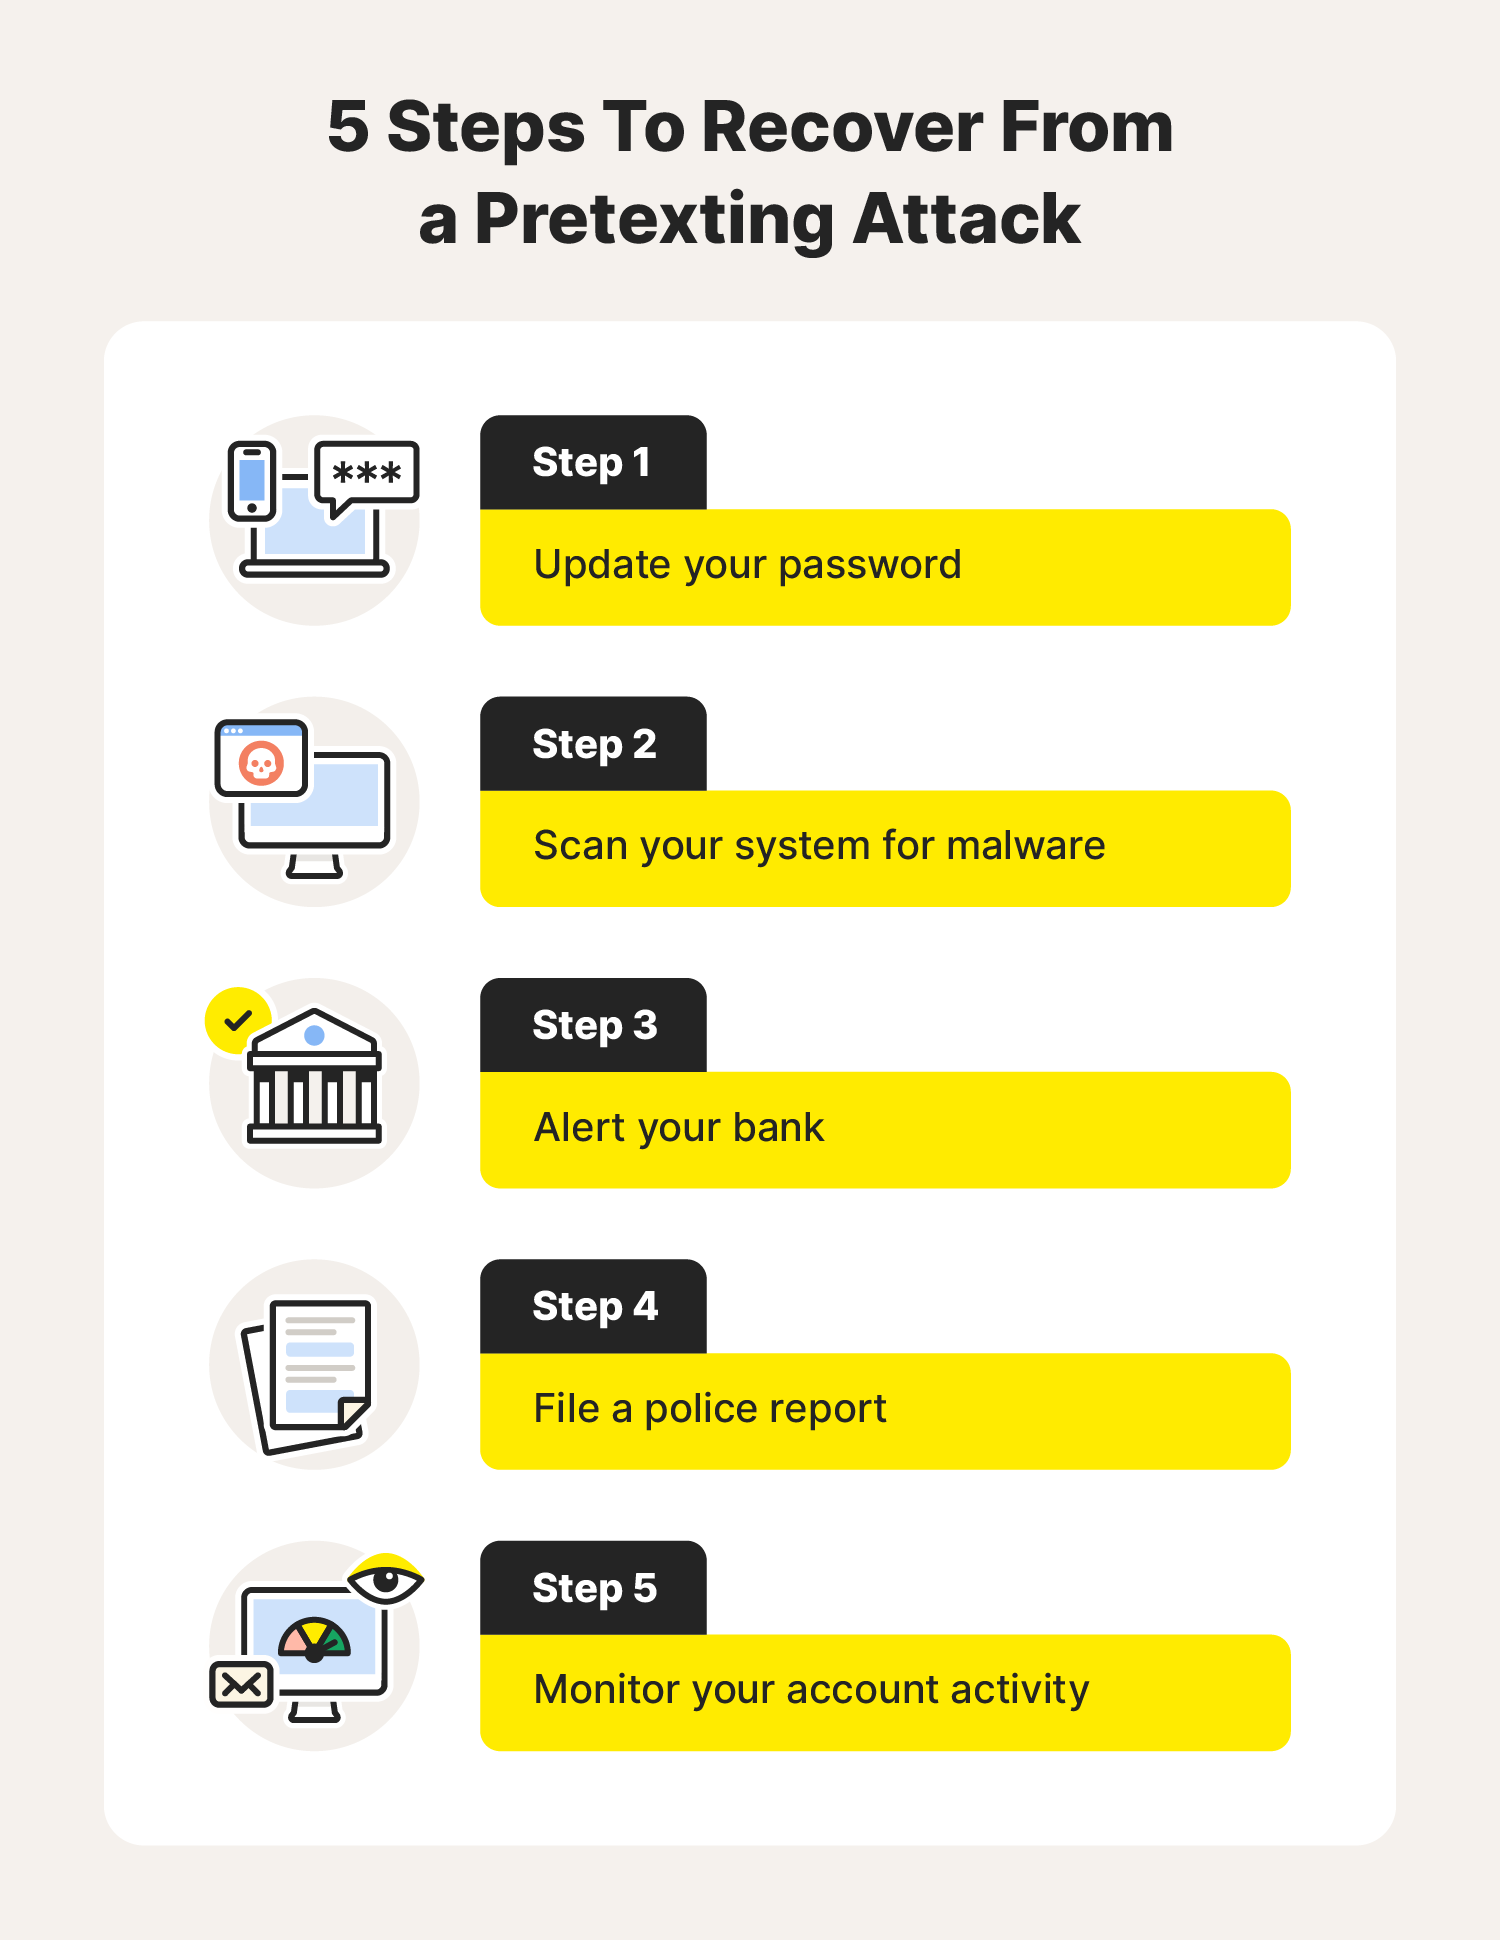 An image lays out five steps internet users can follow to recover from a pretexting attack.